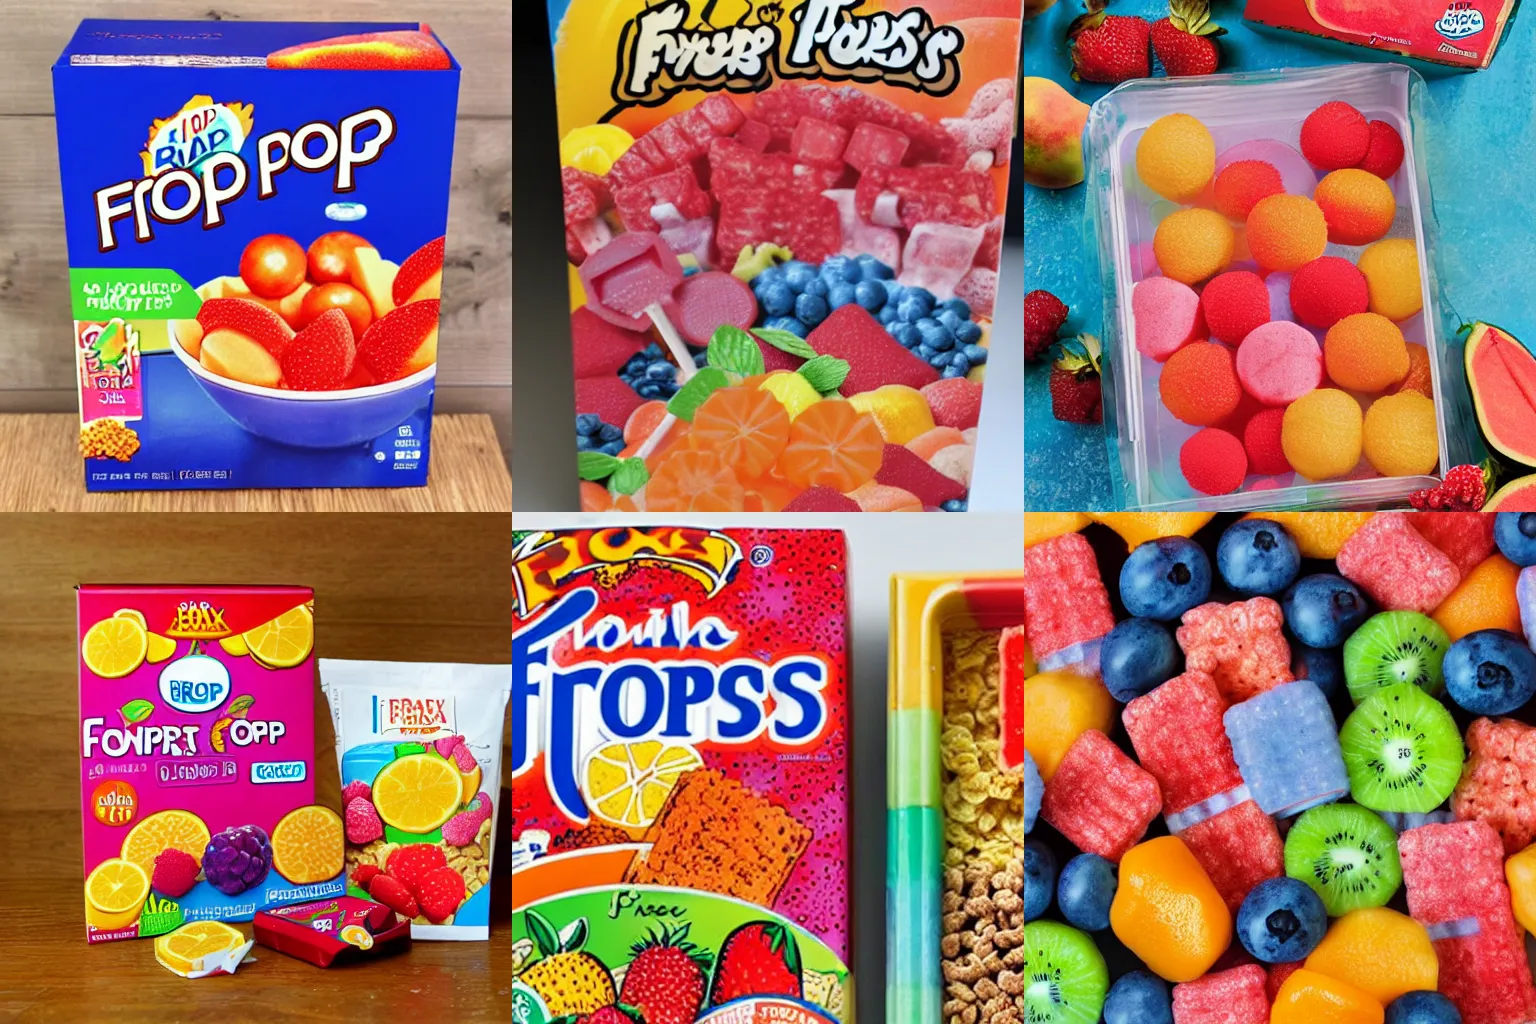 Prompt: a box of Fruit Pops brand cereal